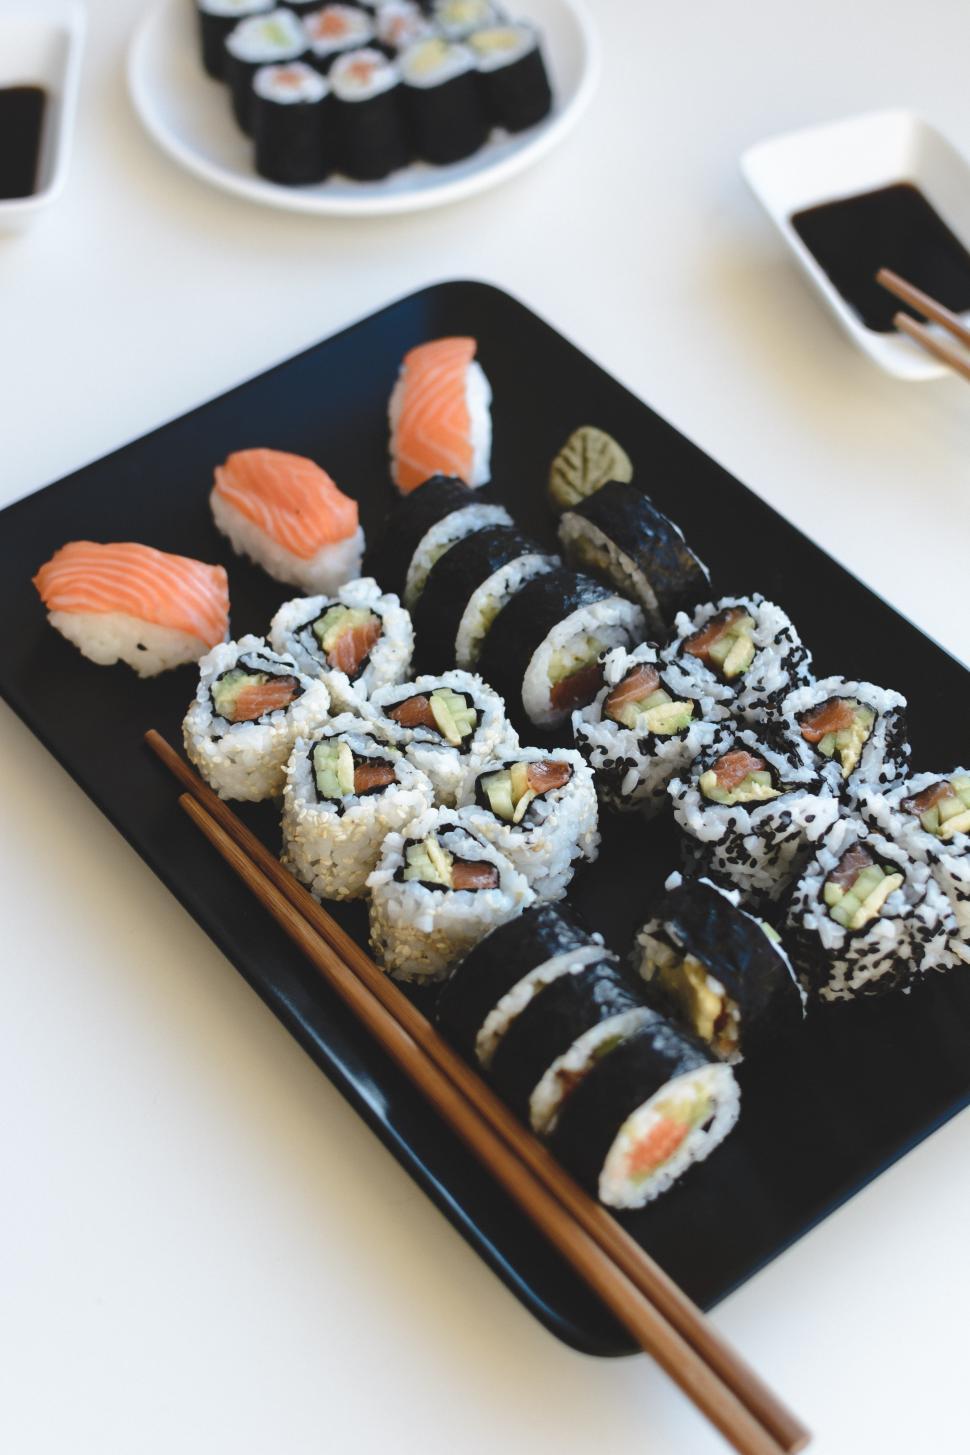 Free Image of A plate of sushi on a table 